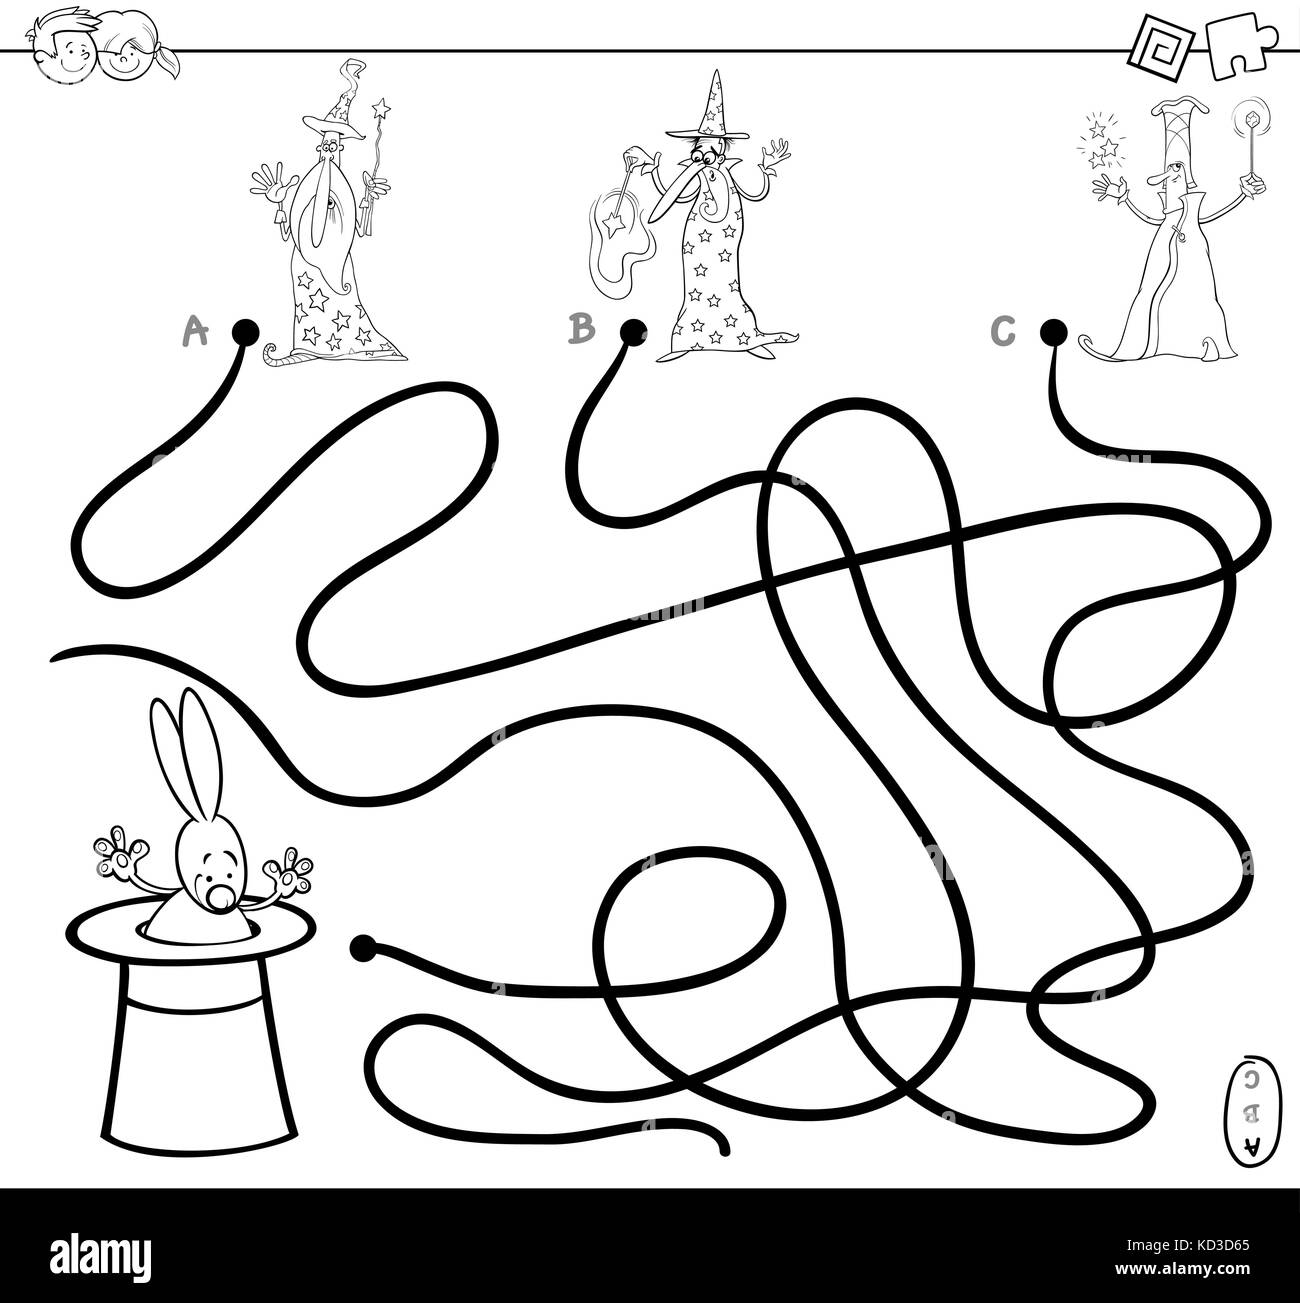 Black and White Cartoon Illustration of Paths or Maze Puzzle Activity Game with Wizard Characters and Rabbit in a Hat Coloring Book Stock Vector